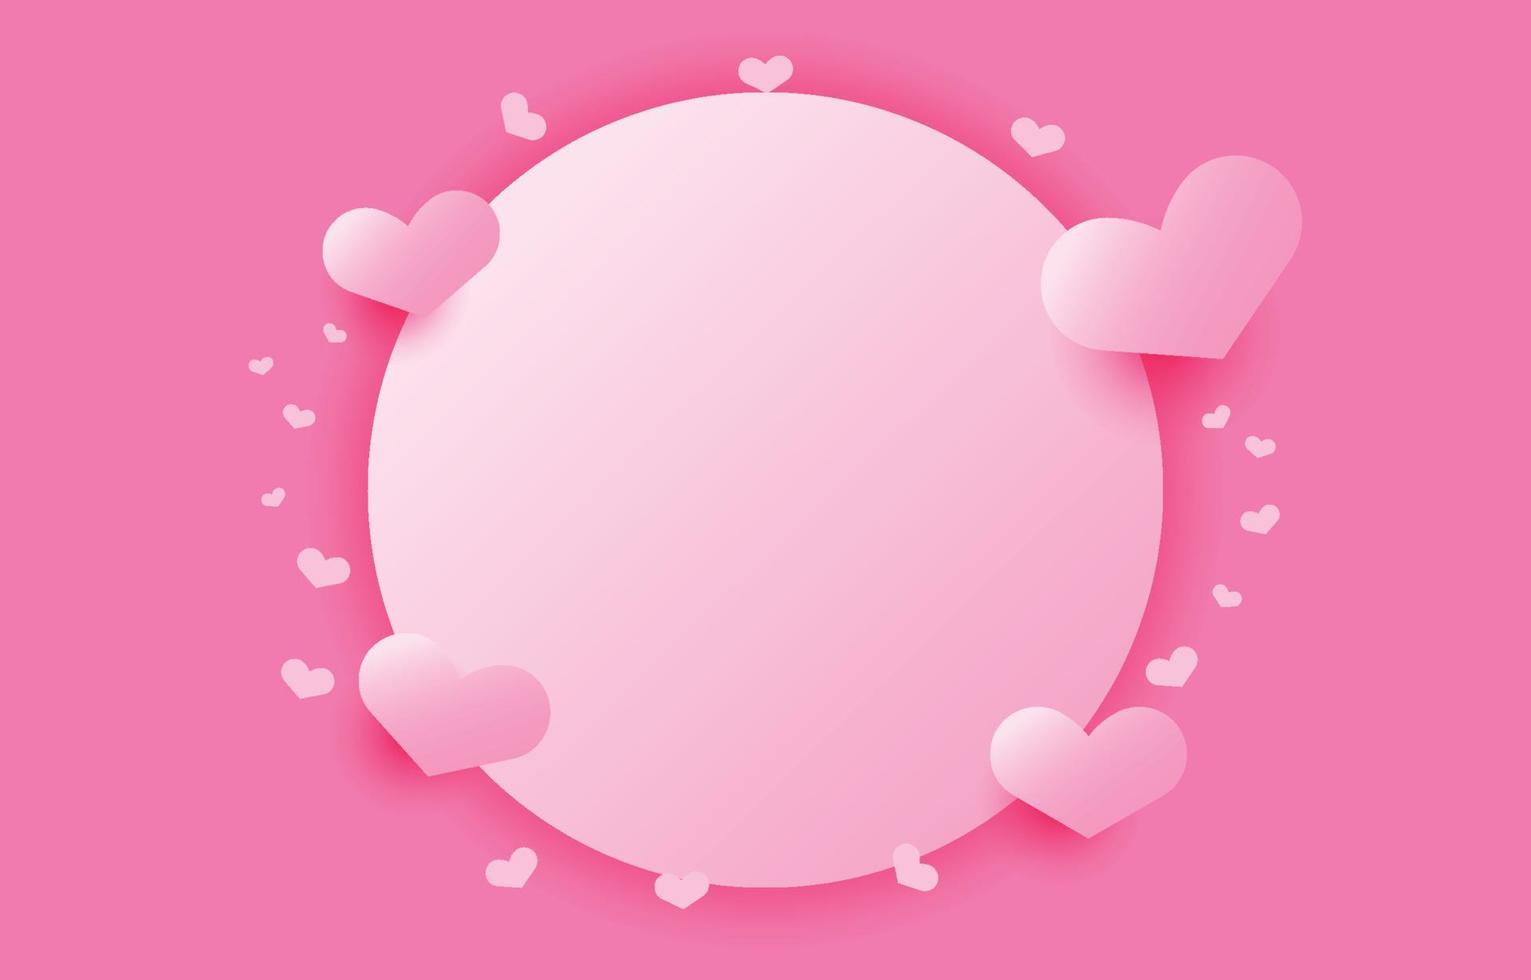 Circle background frame decorated with bright pink hearts, valentines day concept, couple, mother's day, free space love wallpaper illustration vector. vector